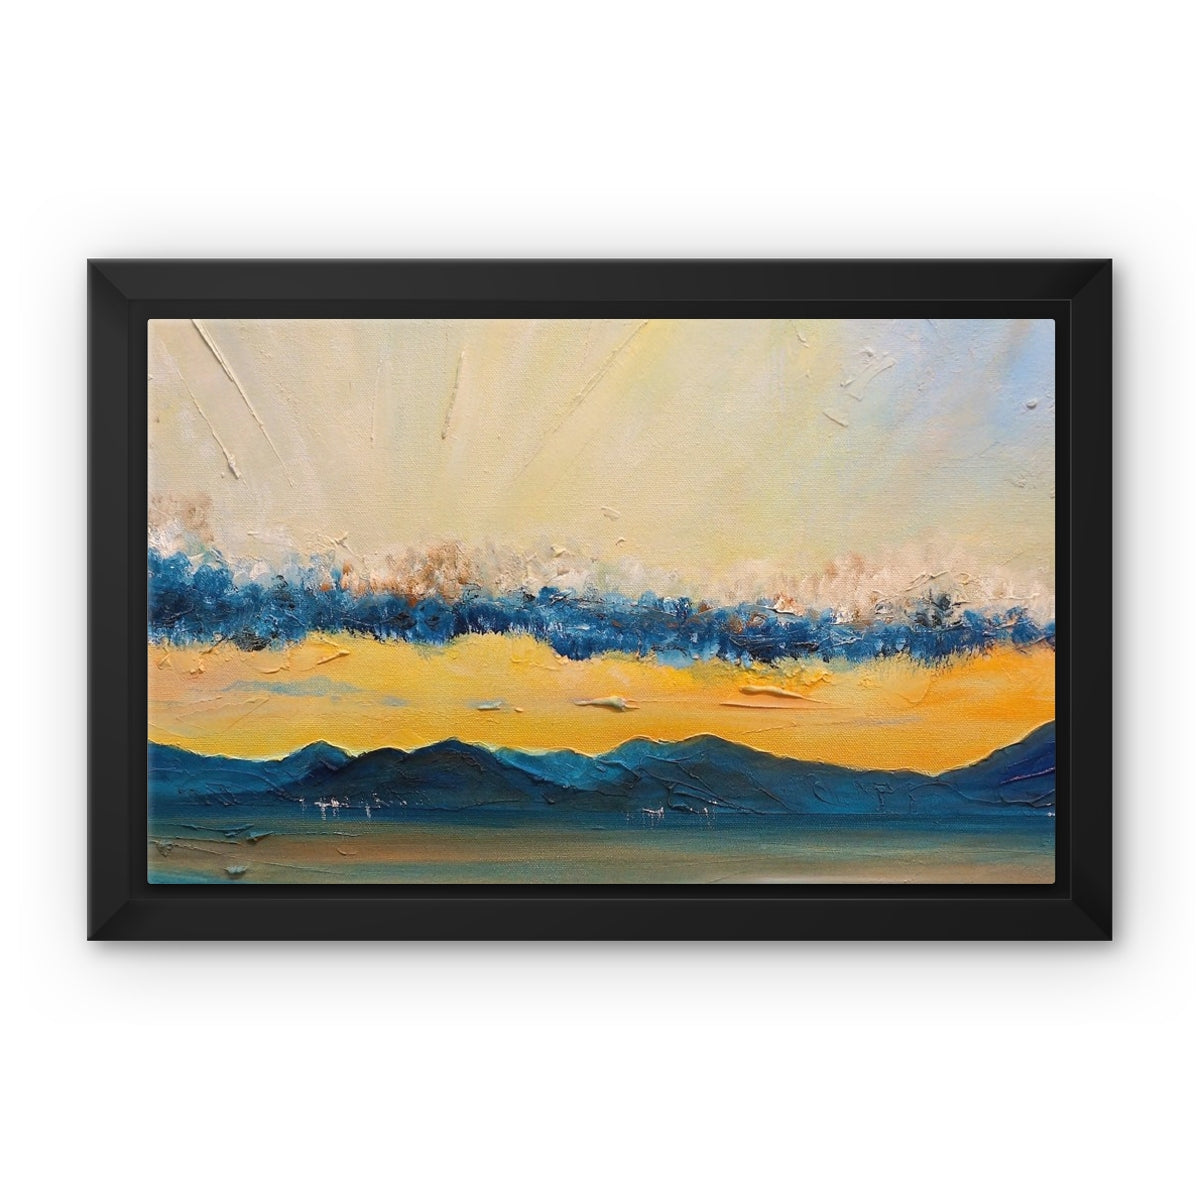 River Clyde From Skelmorlie Painting | Framed Canvas From Scotland-Floating Framed Canvas Prints-River Clyde Art Gallery-Paintings, Prints, Homeware, Art Gifts From Scotland By Scottish Artist Kevin Hunter